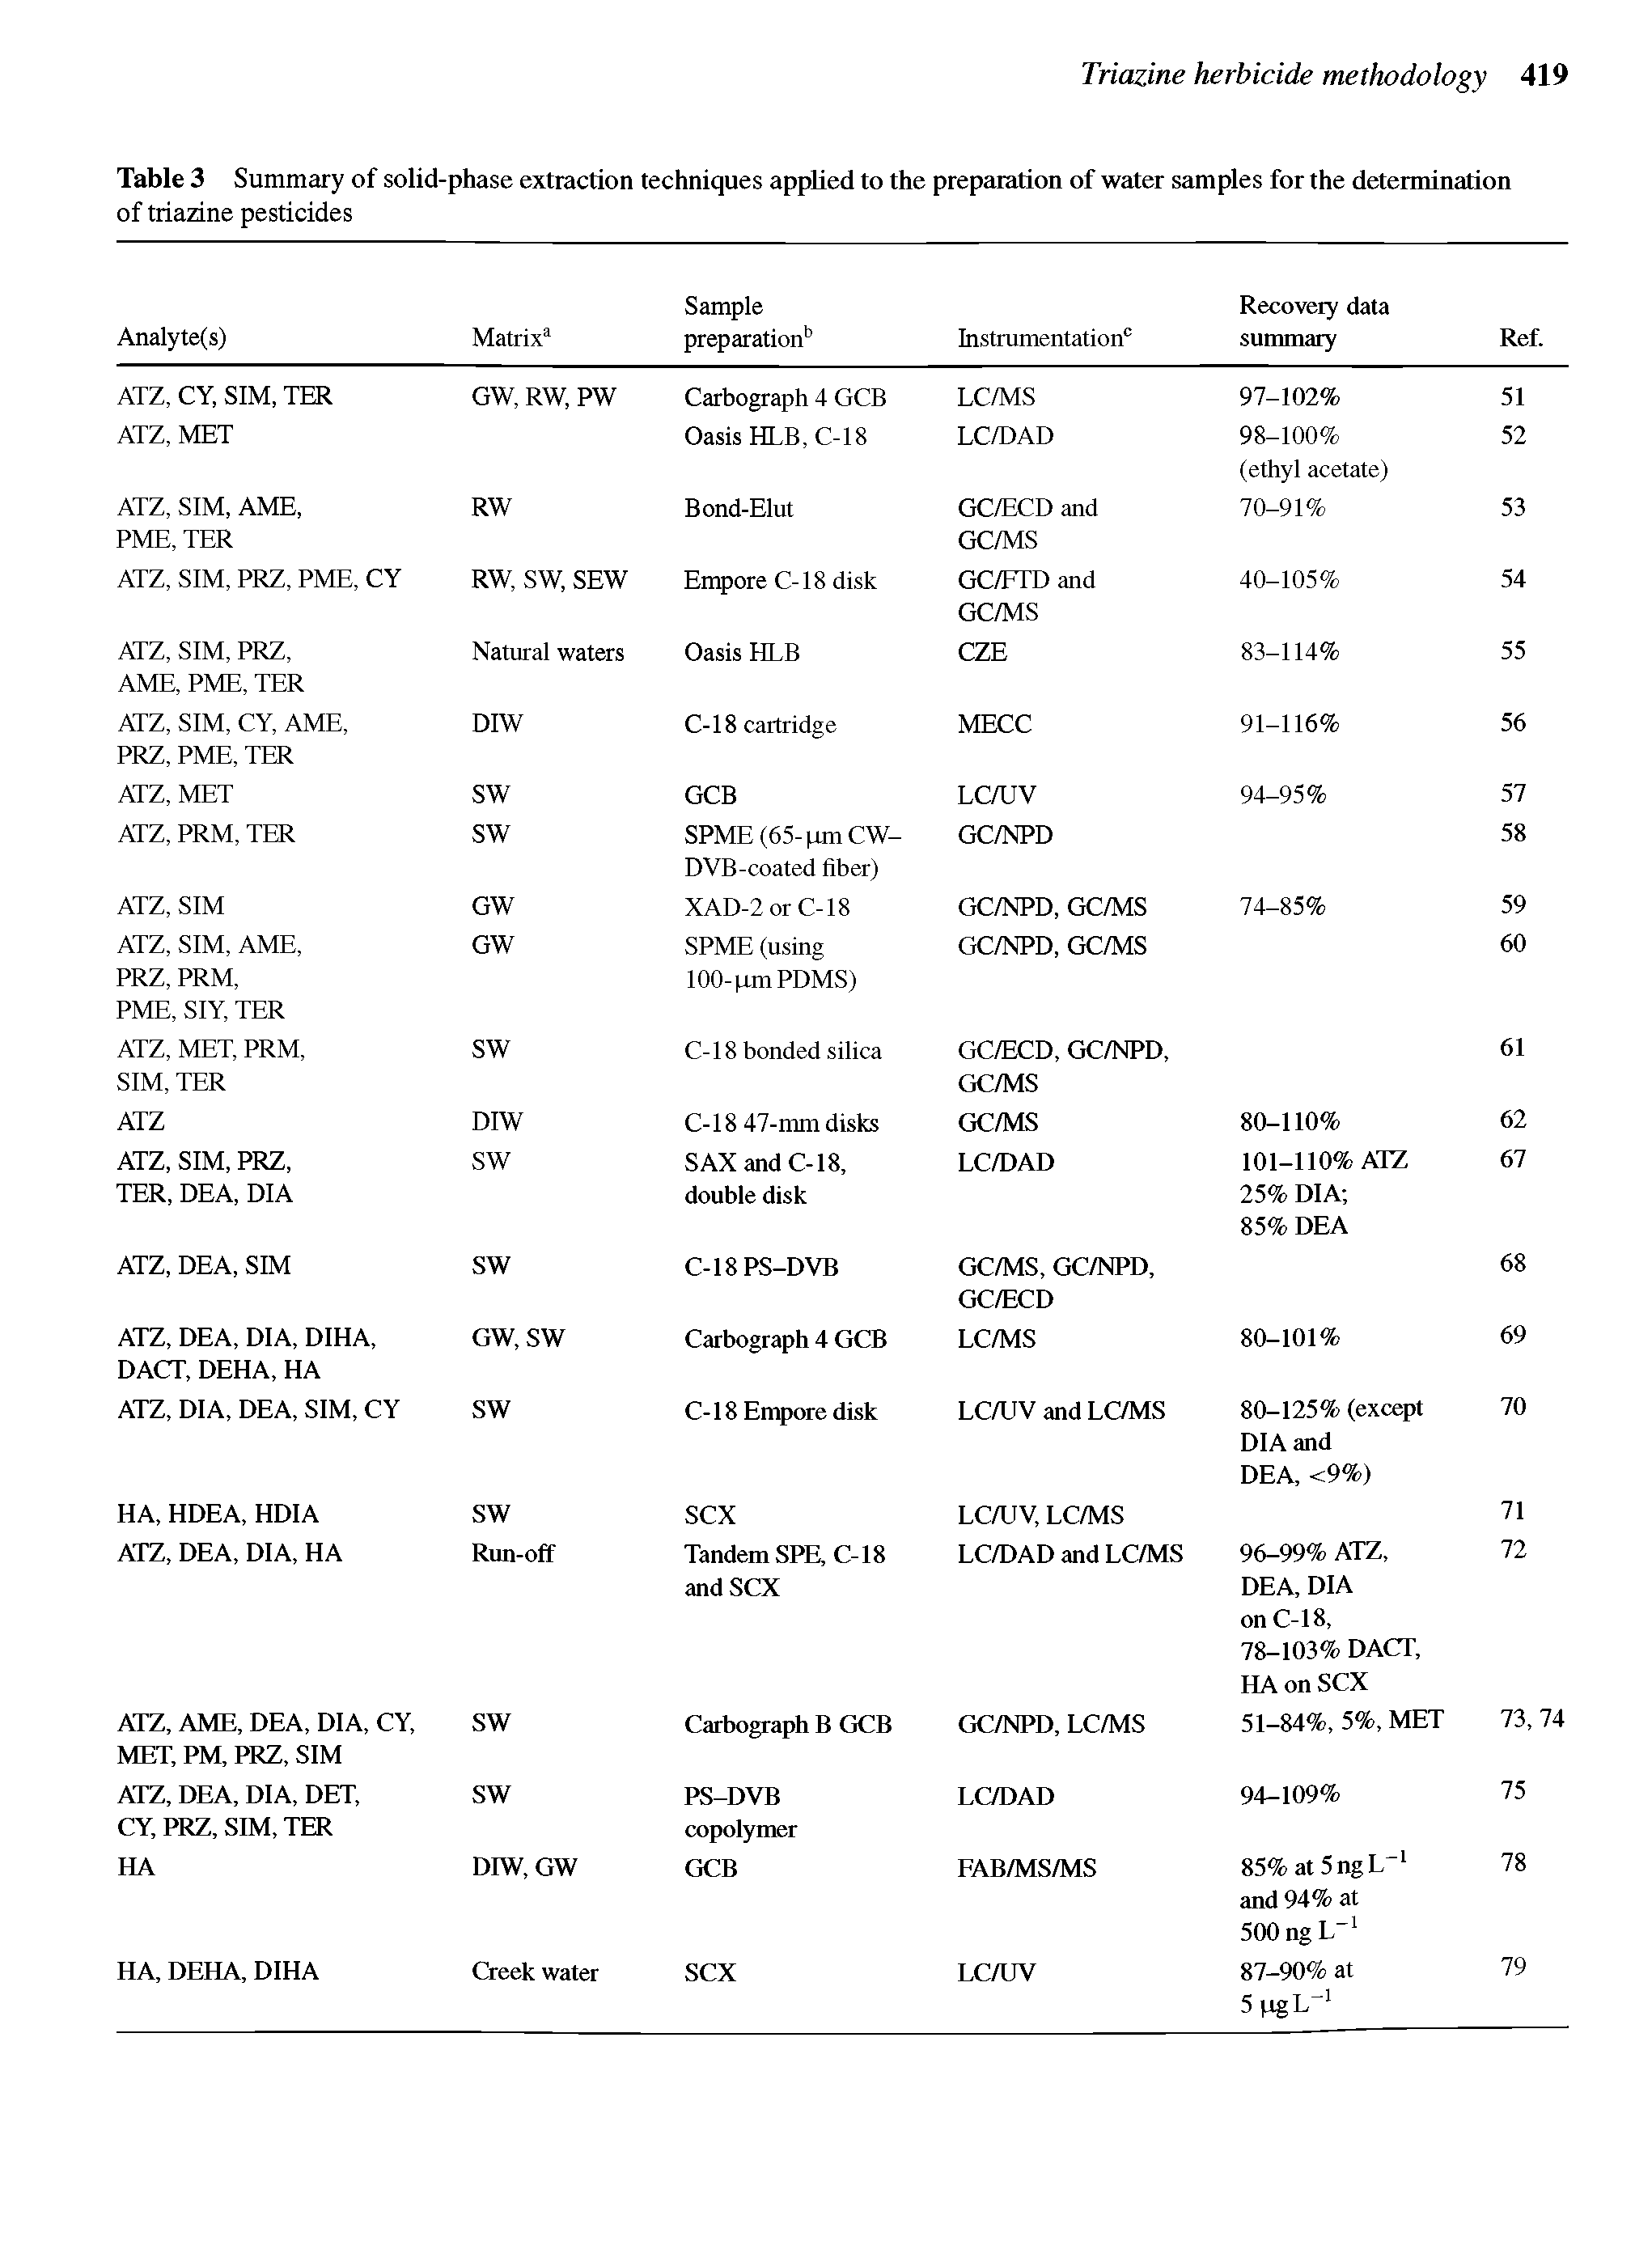 Table 3 Summary of solid-phase extraction techniques applied to the preparation of water samples for the determination of triazine pesticides...